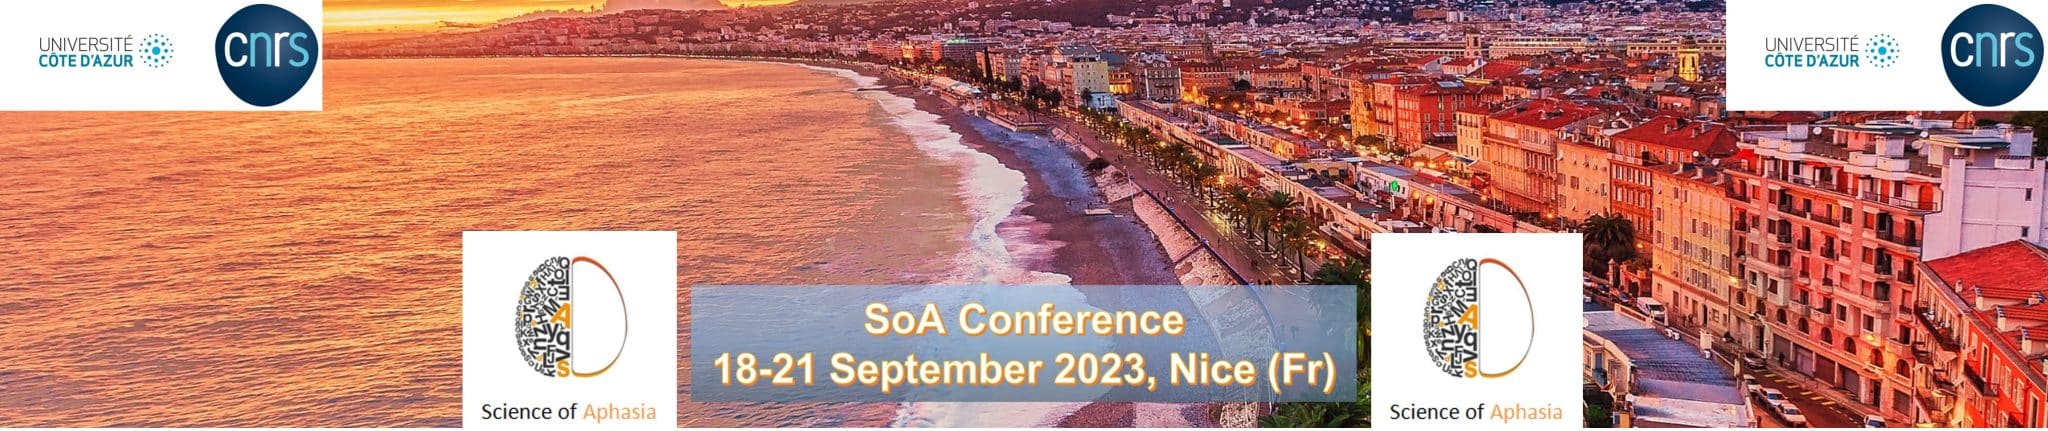 Science of Aphasia Conference - SOA 2023